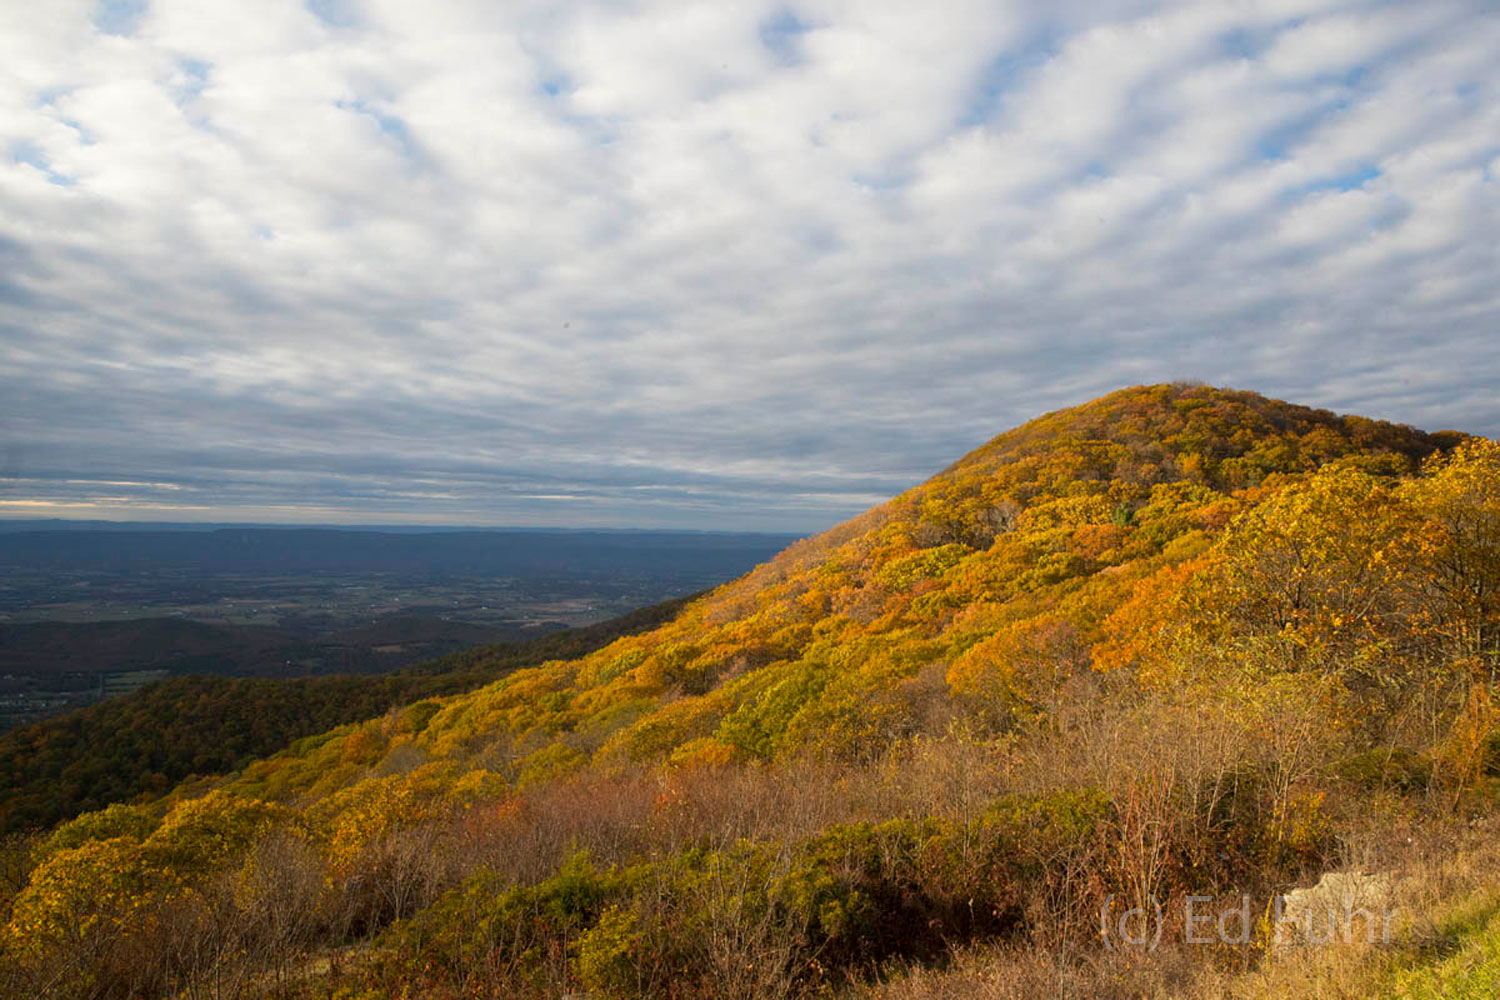 Timber Hollow Overlook provides a sweeping view to the west, the rounded top of Naked Top mountain and into the Shenandoah valley...